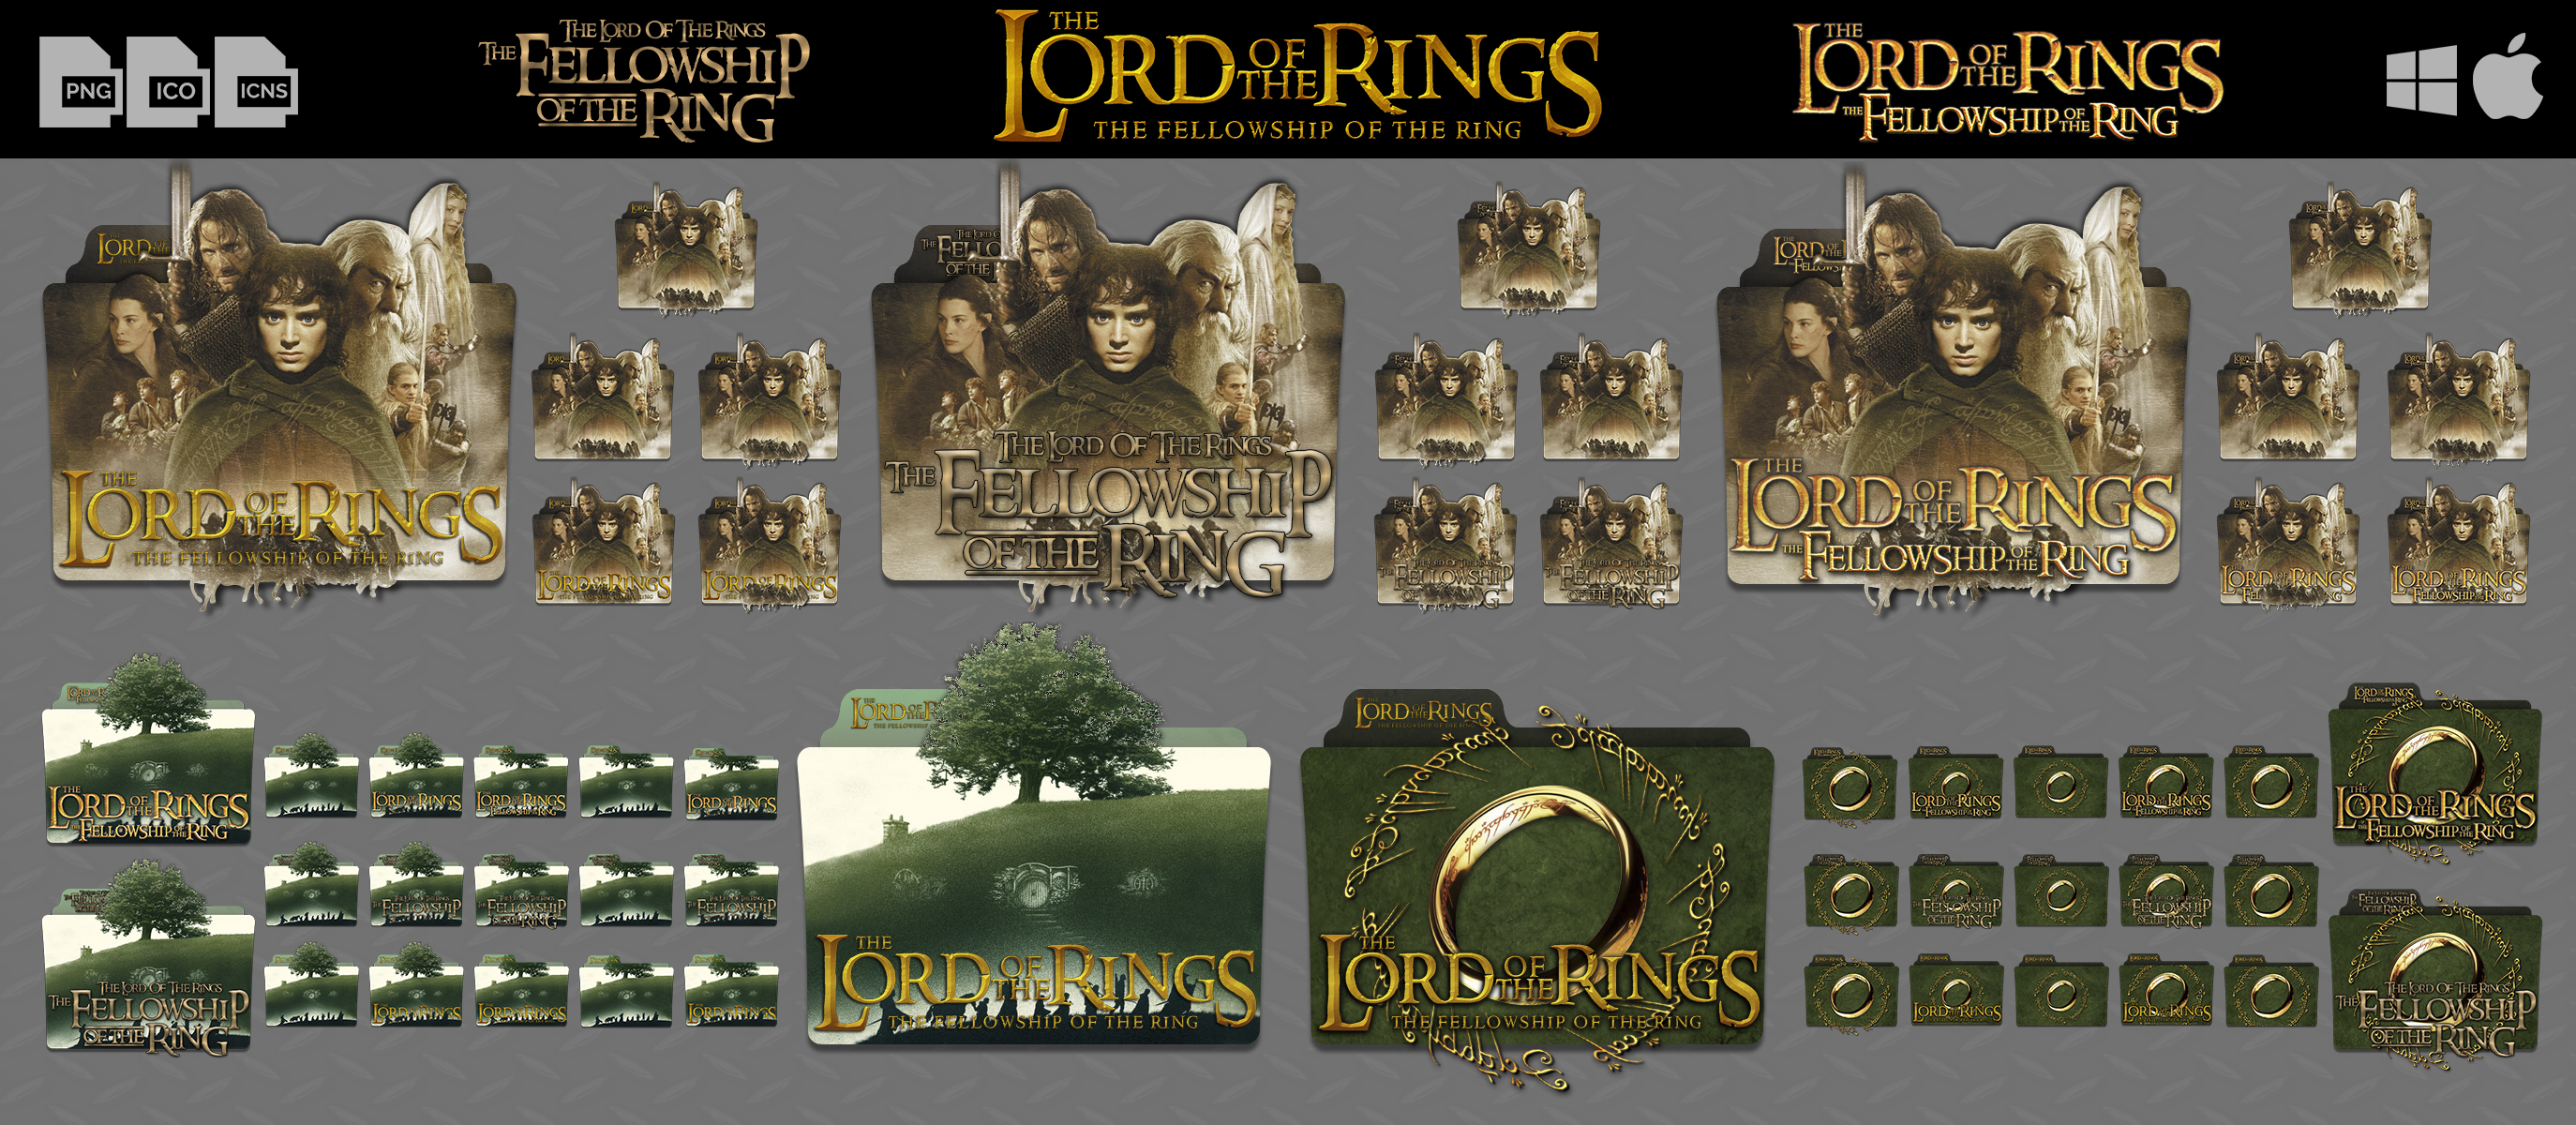 The Lord of The Rings The Fellowship of The Ring